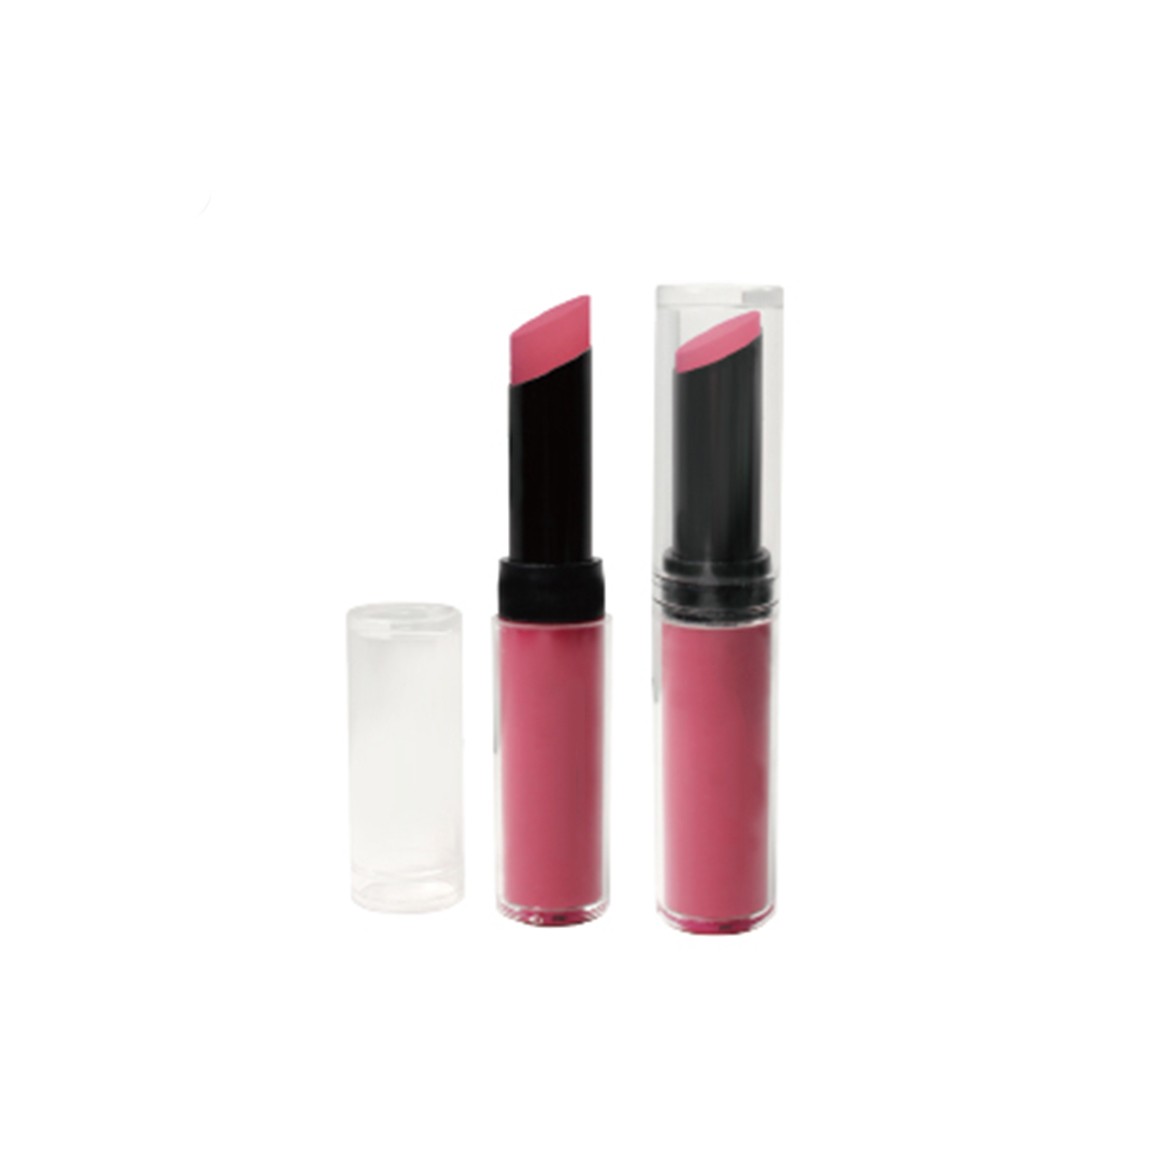 Protect and Hydrate Duo Pack lip balm and multiple use lip care moisture packaging